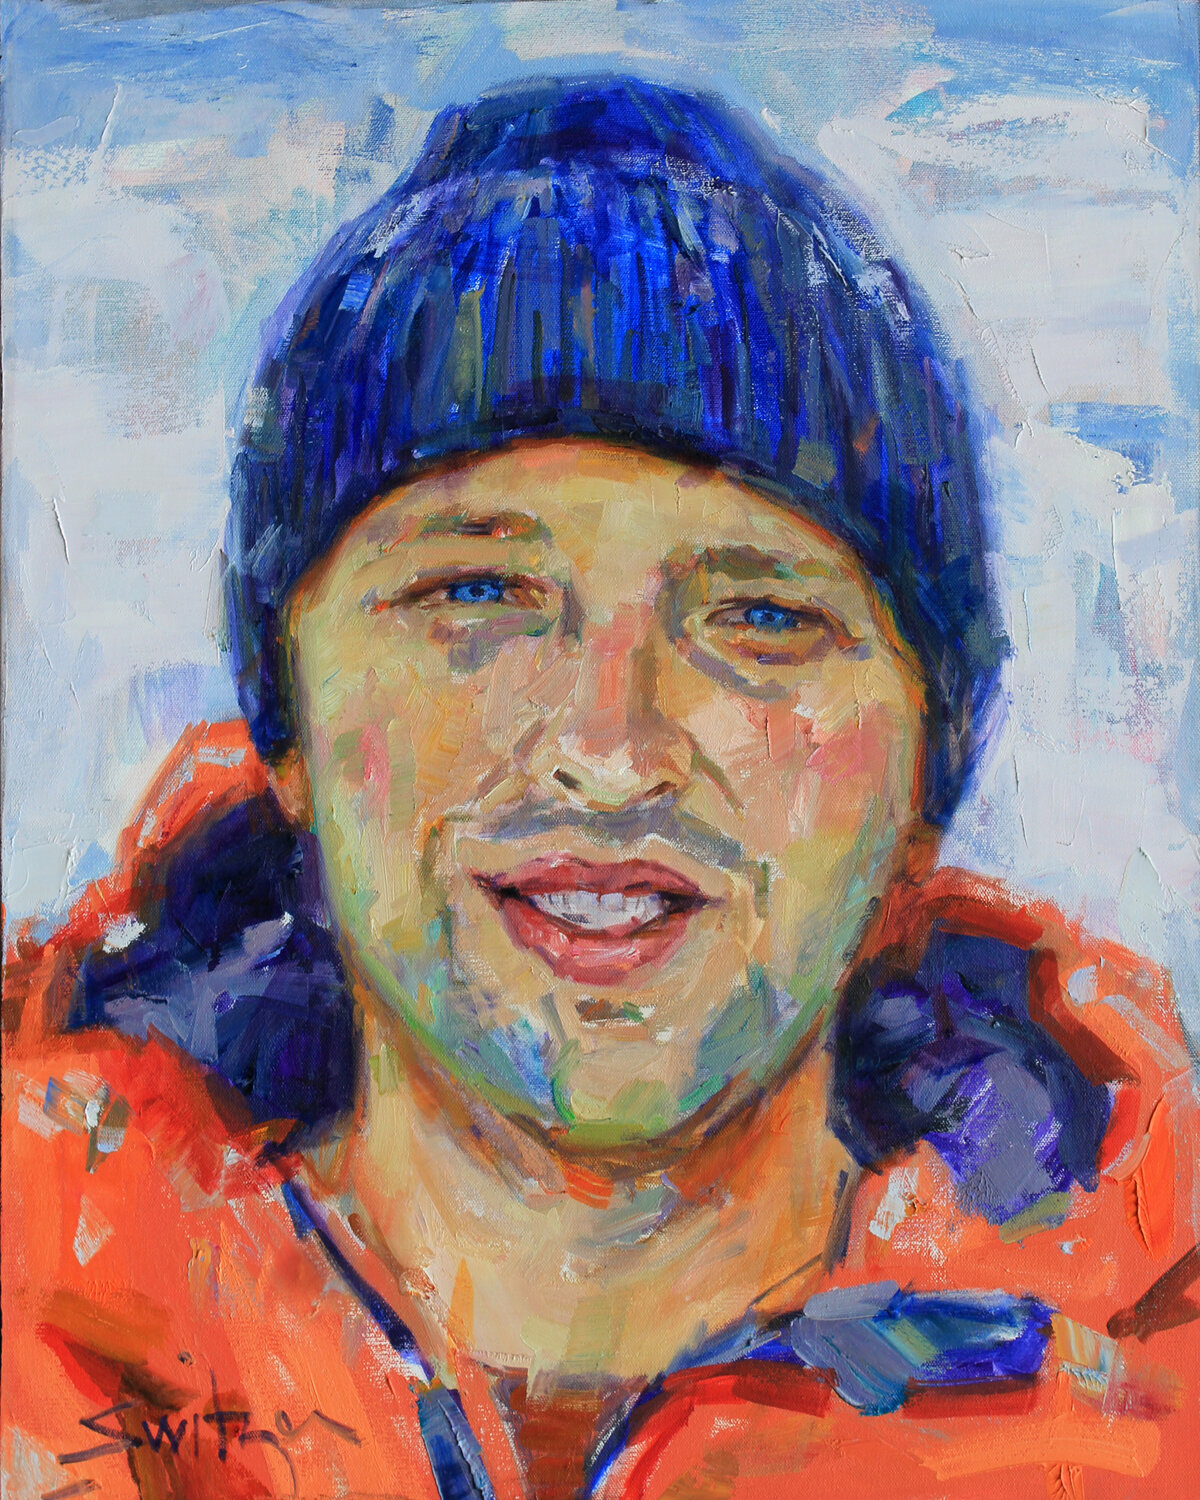  “Ethan”,                                                                                      30x24 inches,                                                                                  oil on canvas                                               